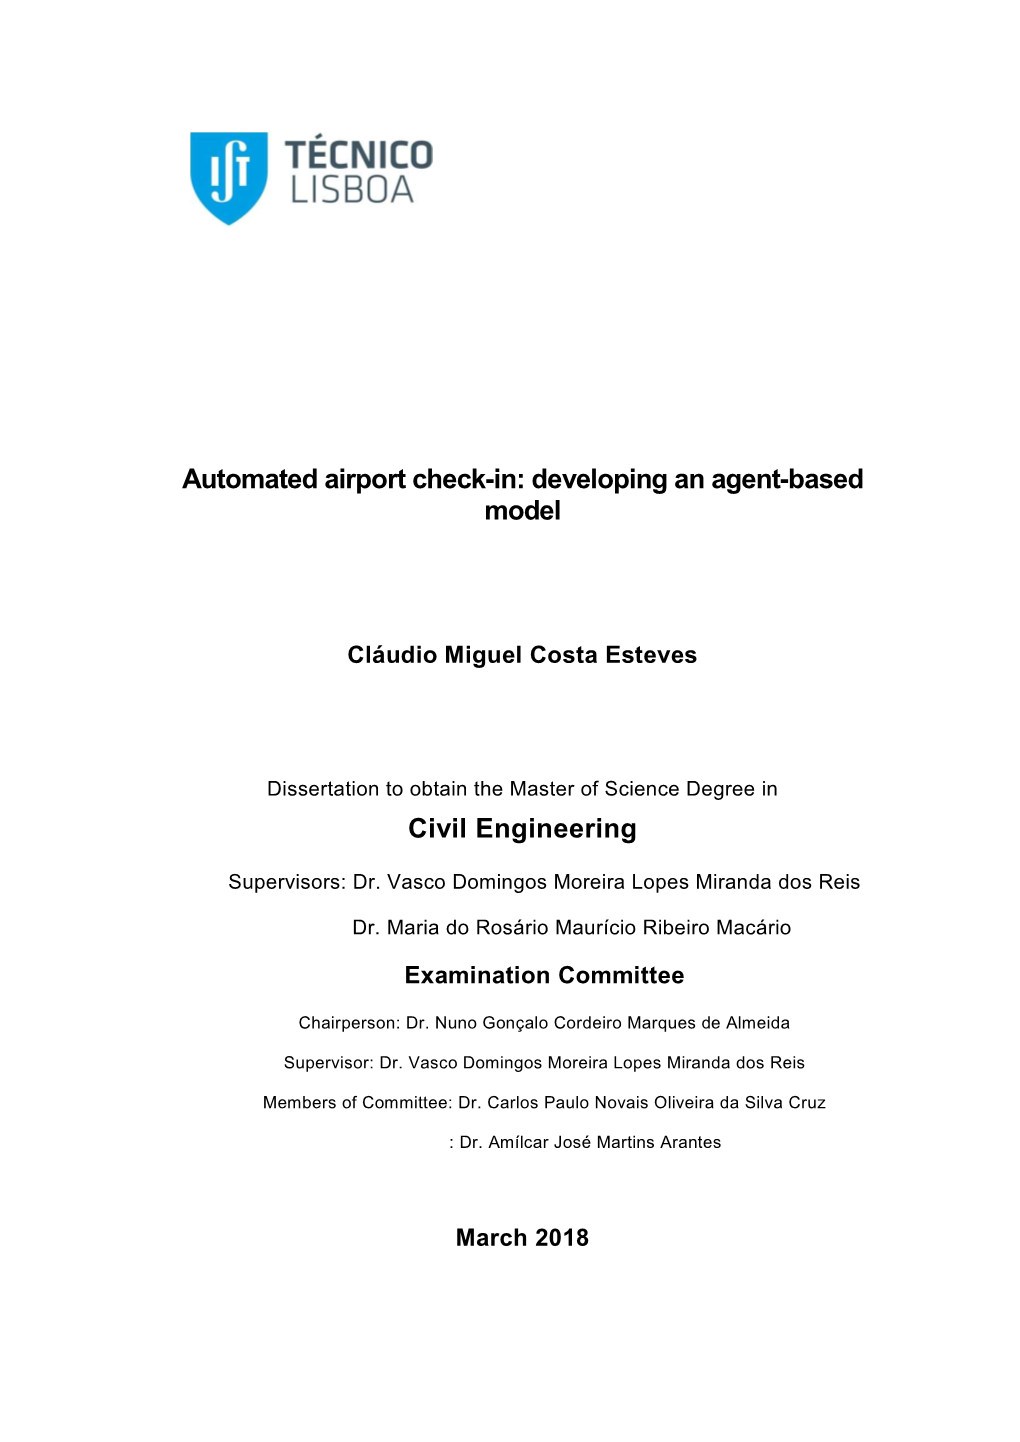 Automated Airport Check-In: Developing an Agent-Based Model